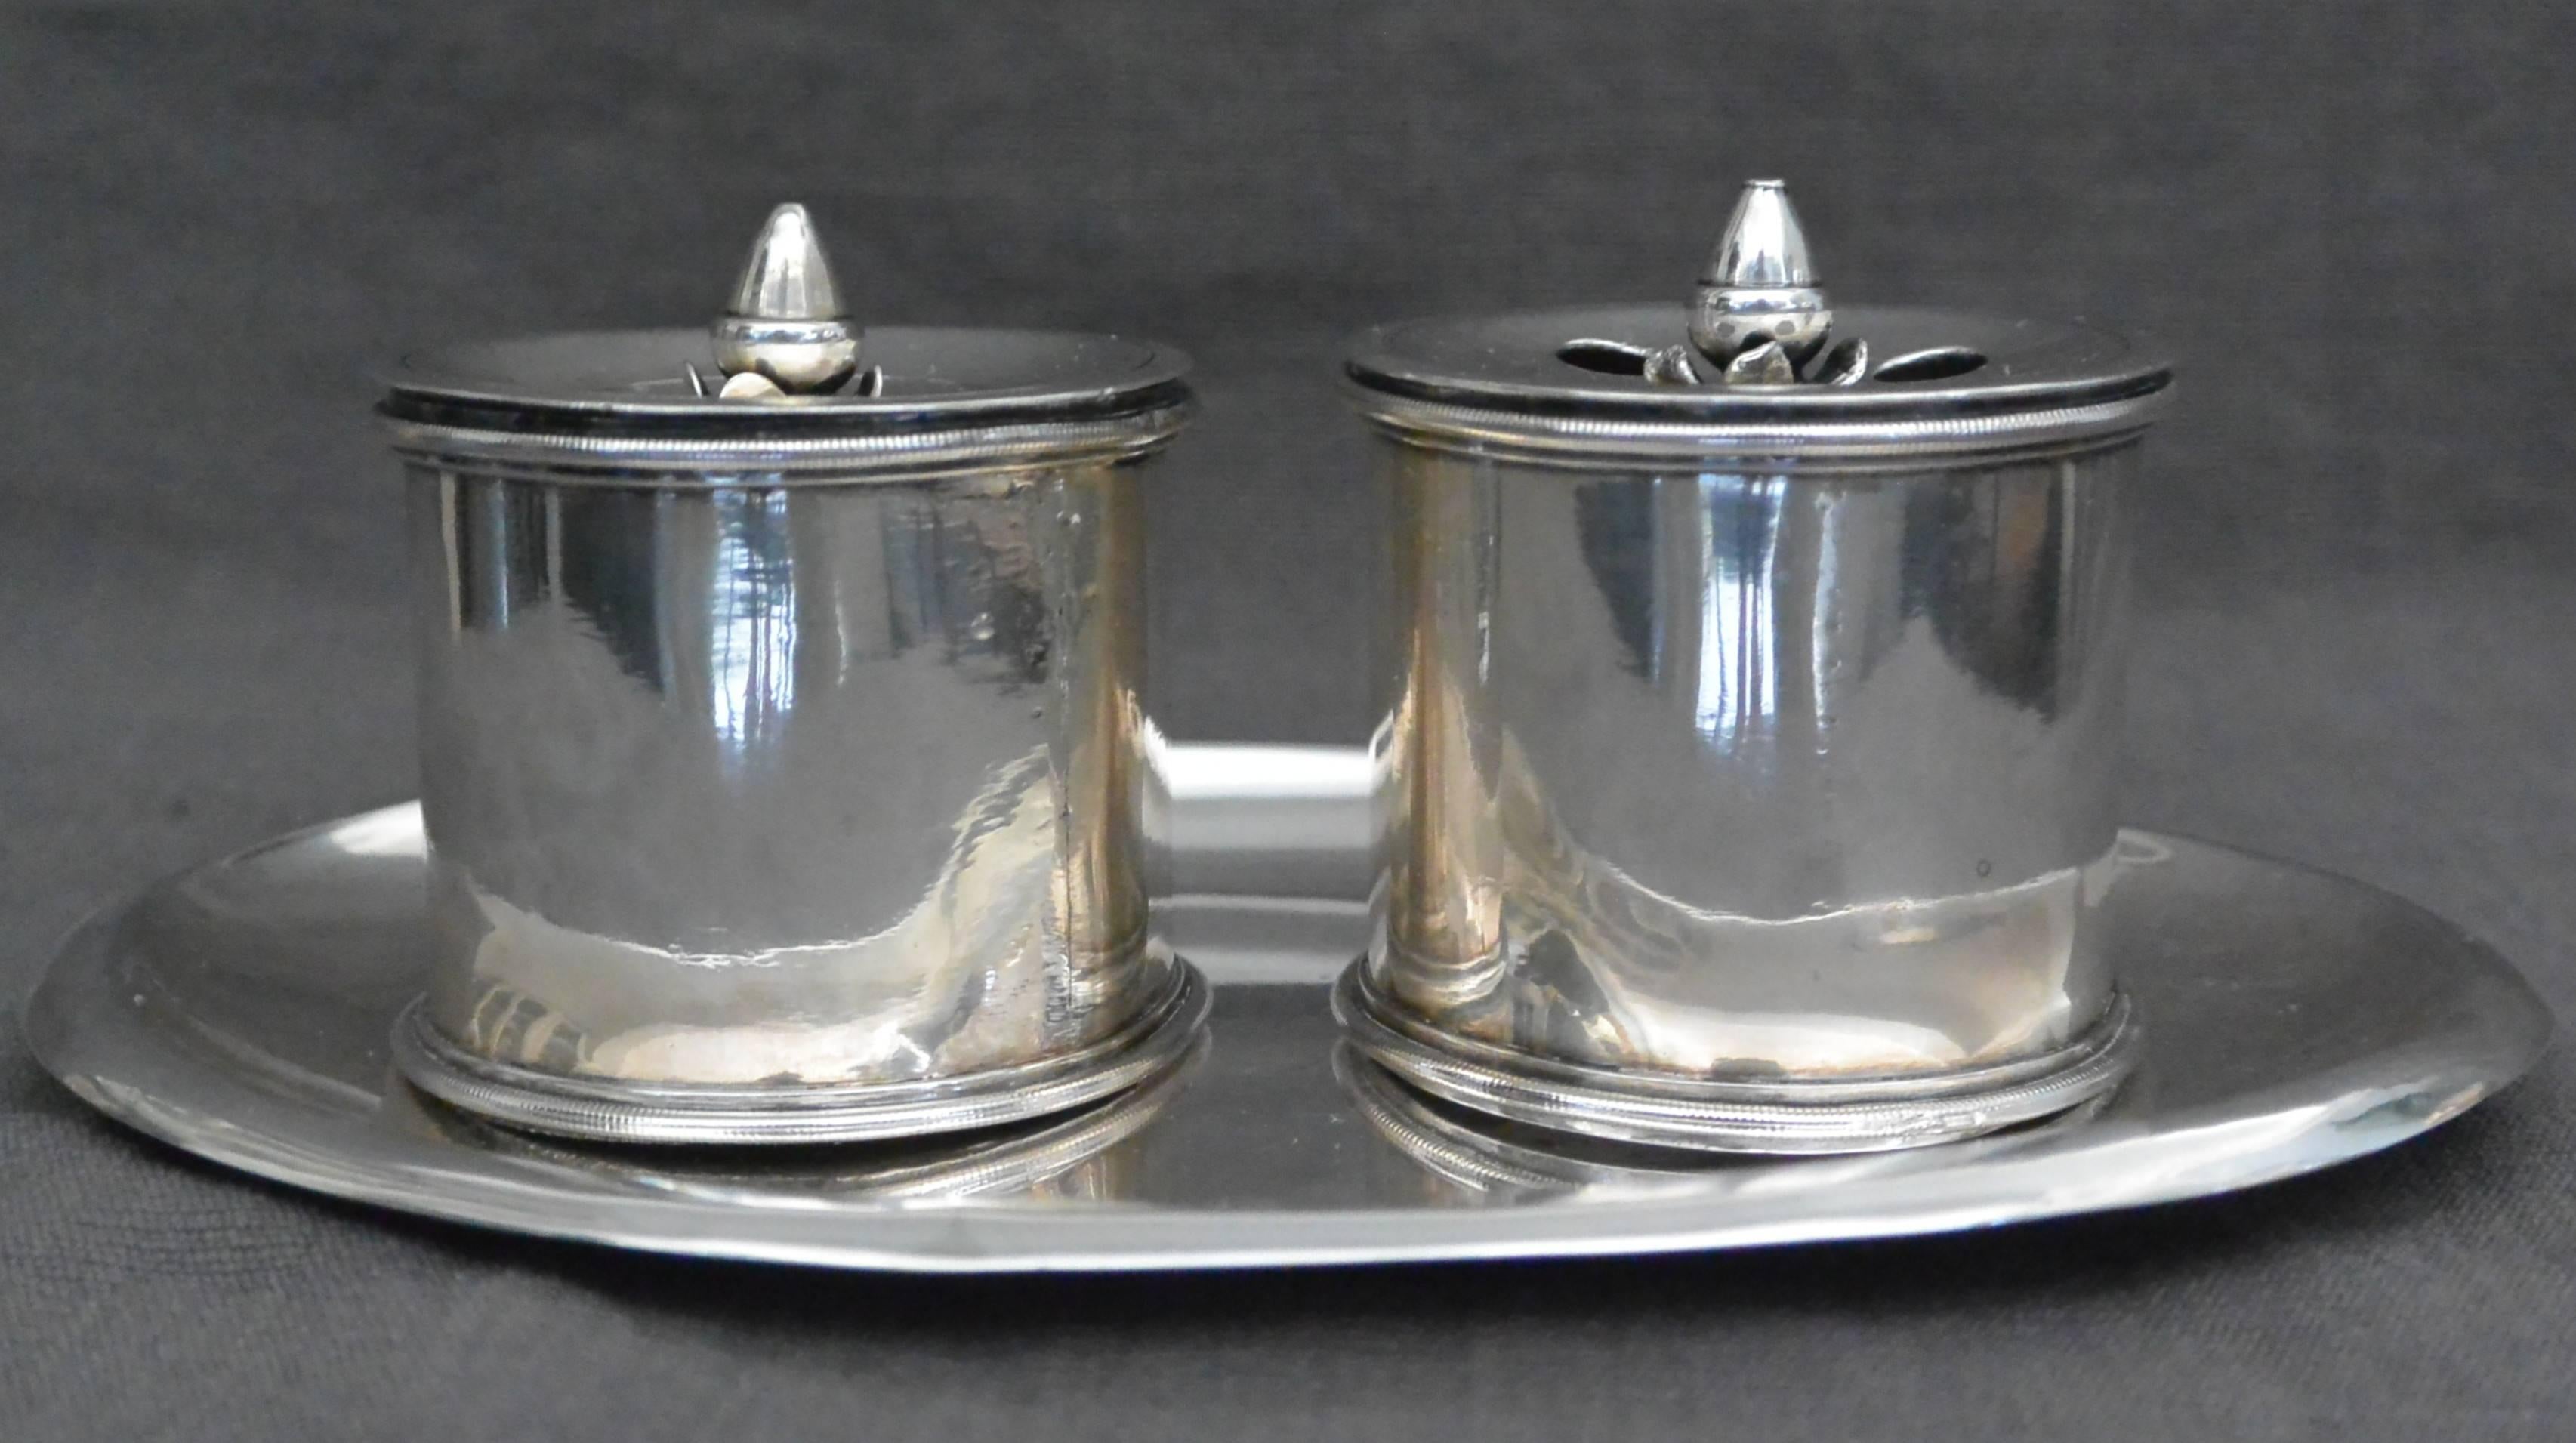 Italian Empire Silver Inkstand. Roman sterling silver inkstand of sober neoclassical form comprising double pots for sander and inkwell with acorn finial lids on a stamped oval tray, Italy, early 1800s. 
Dimensions: Inkwell diameter 2